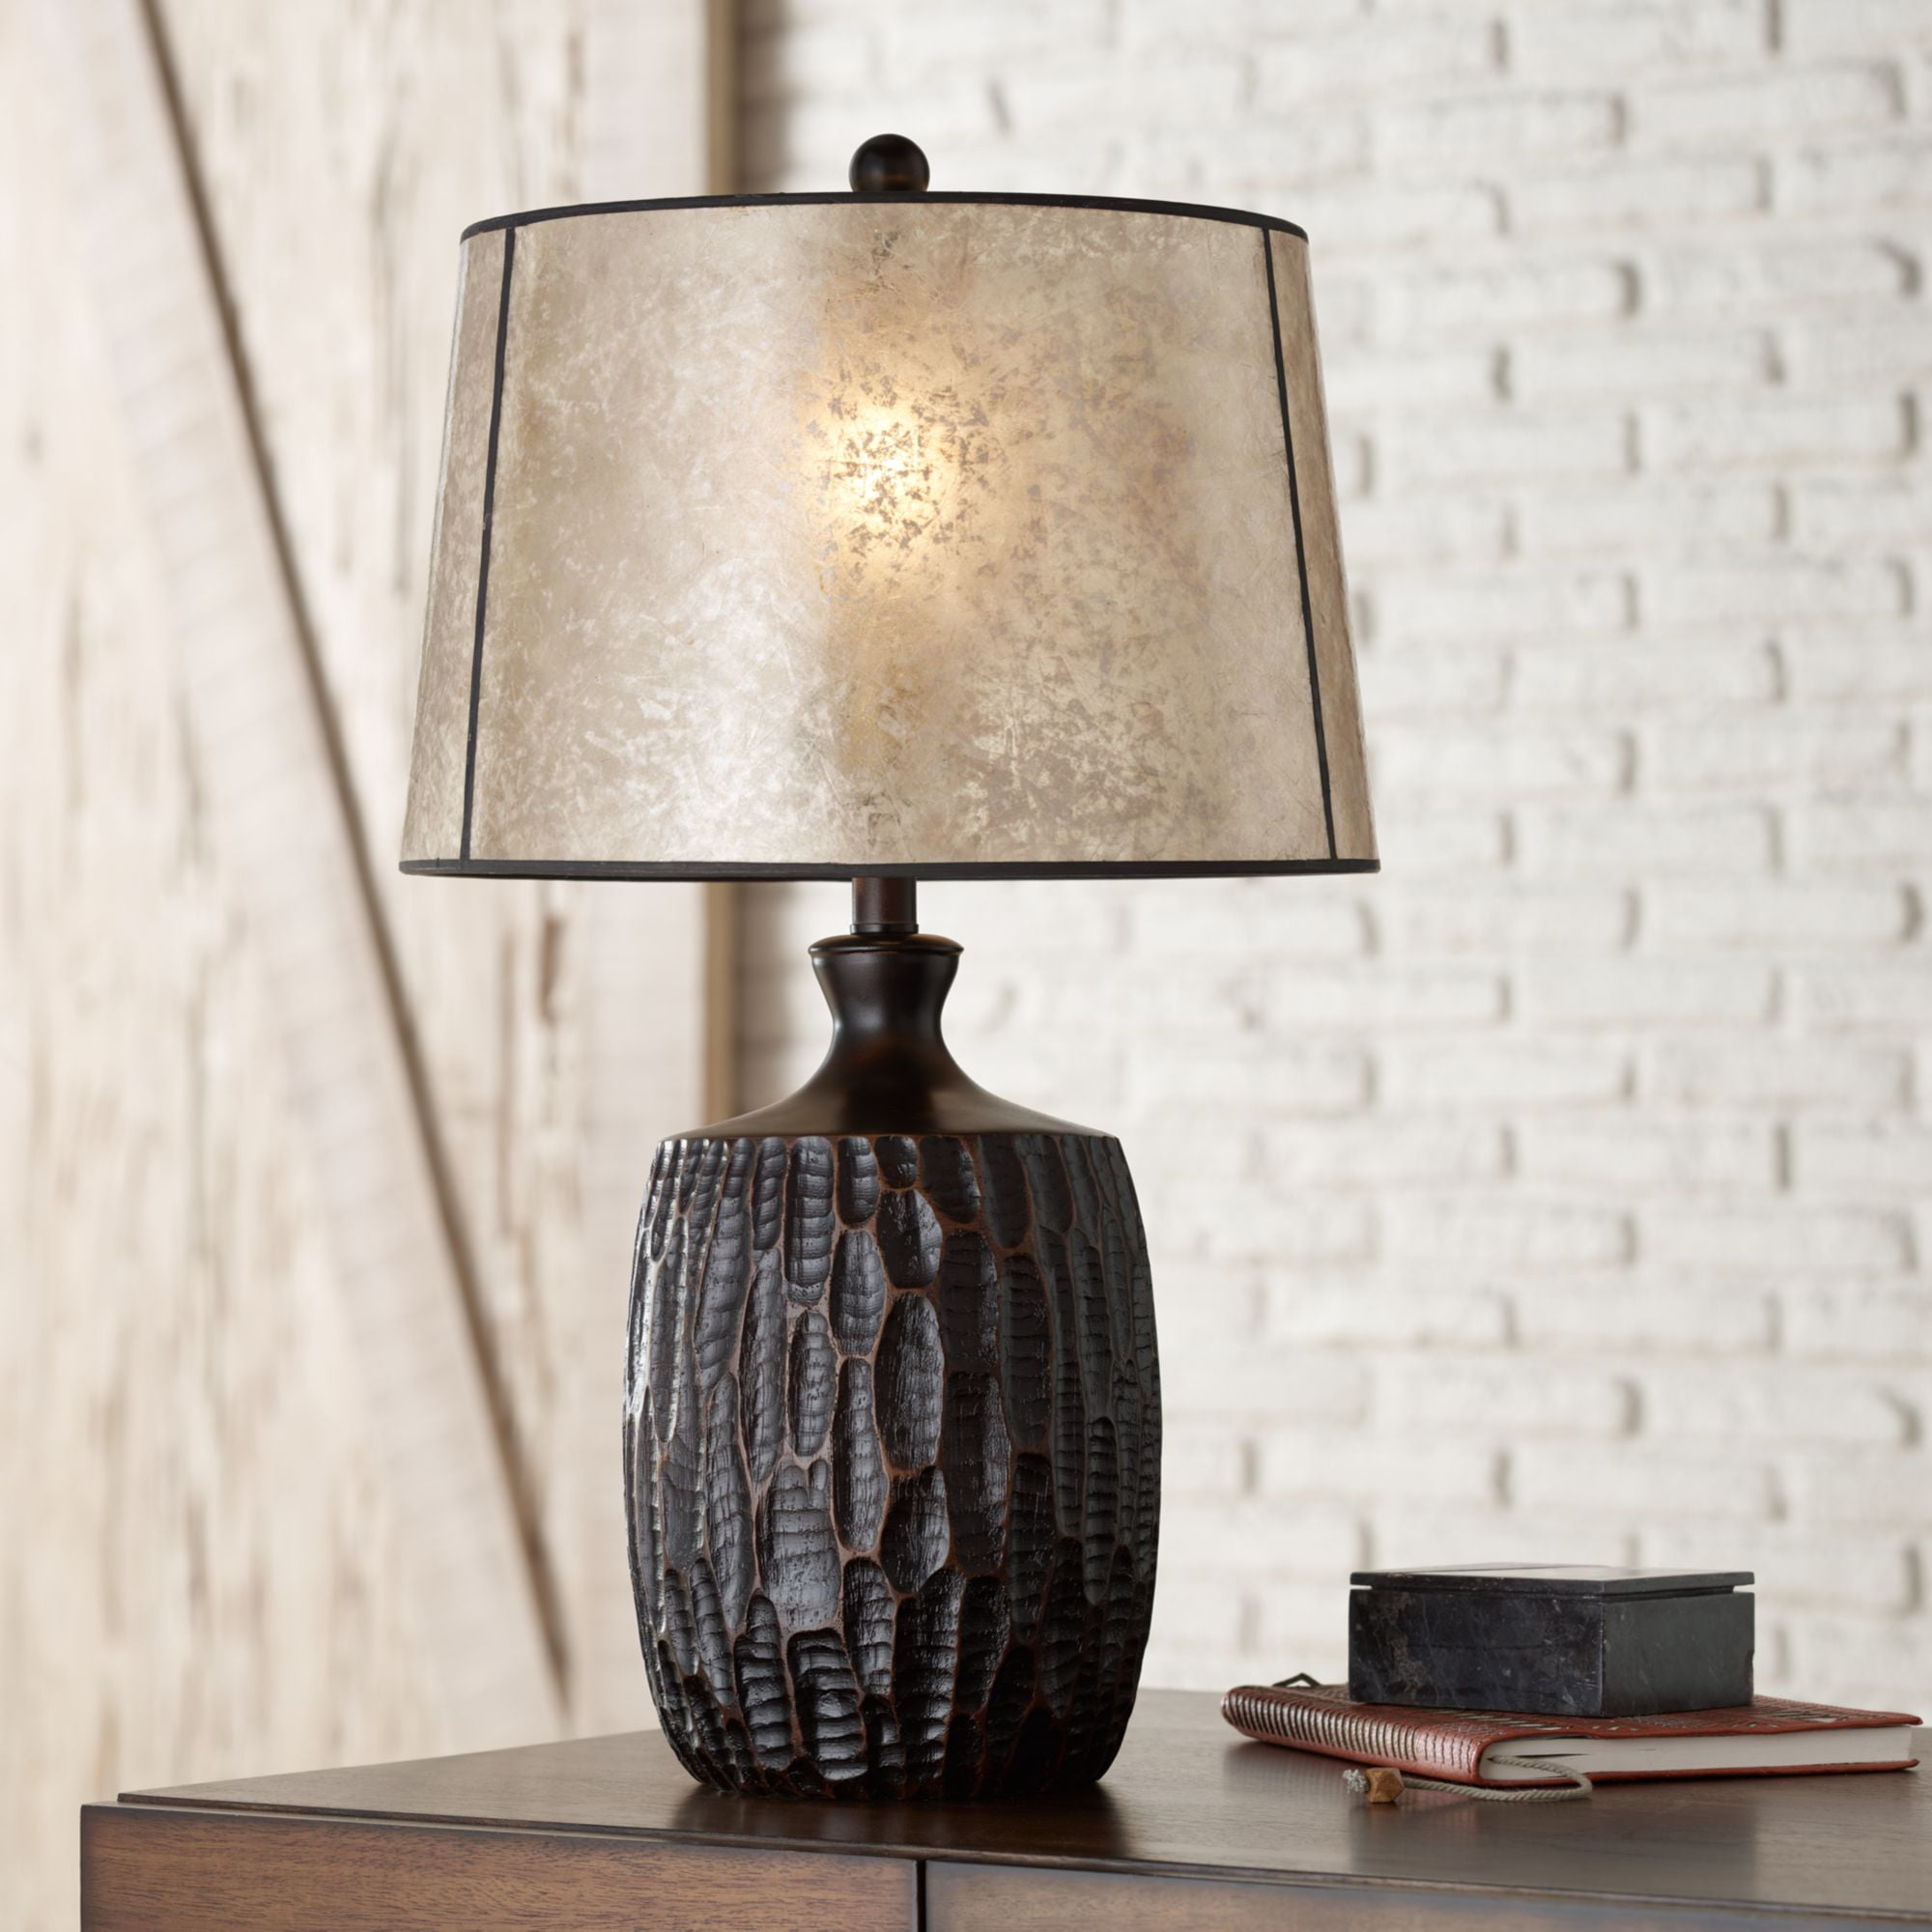 Franklin Iron Works Rustic Table Lamp, Rustic Table Lamps For Bedroom